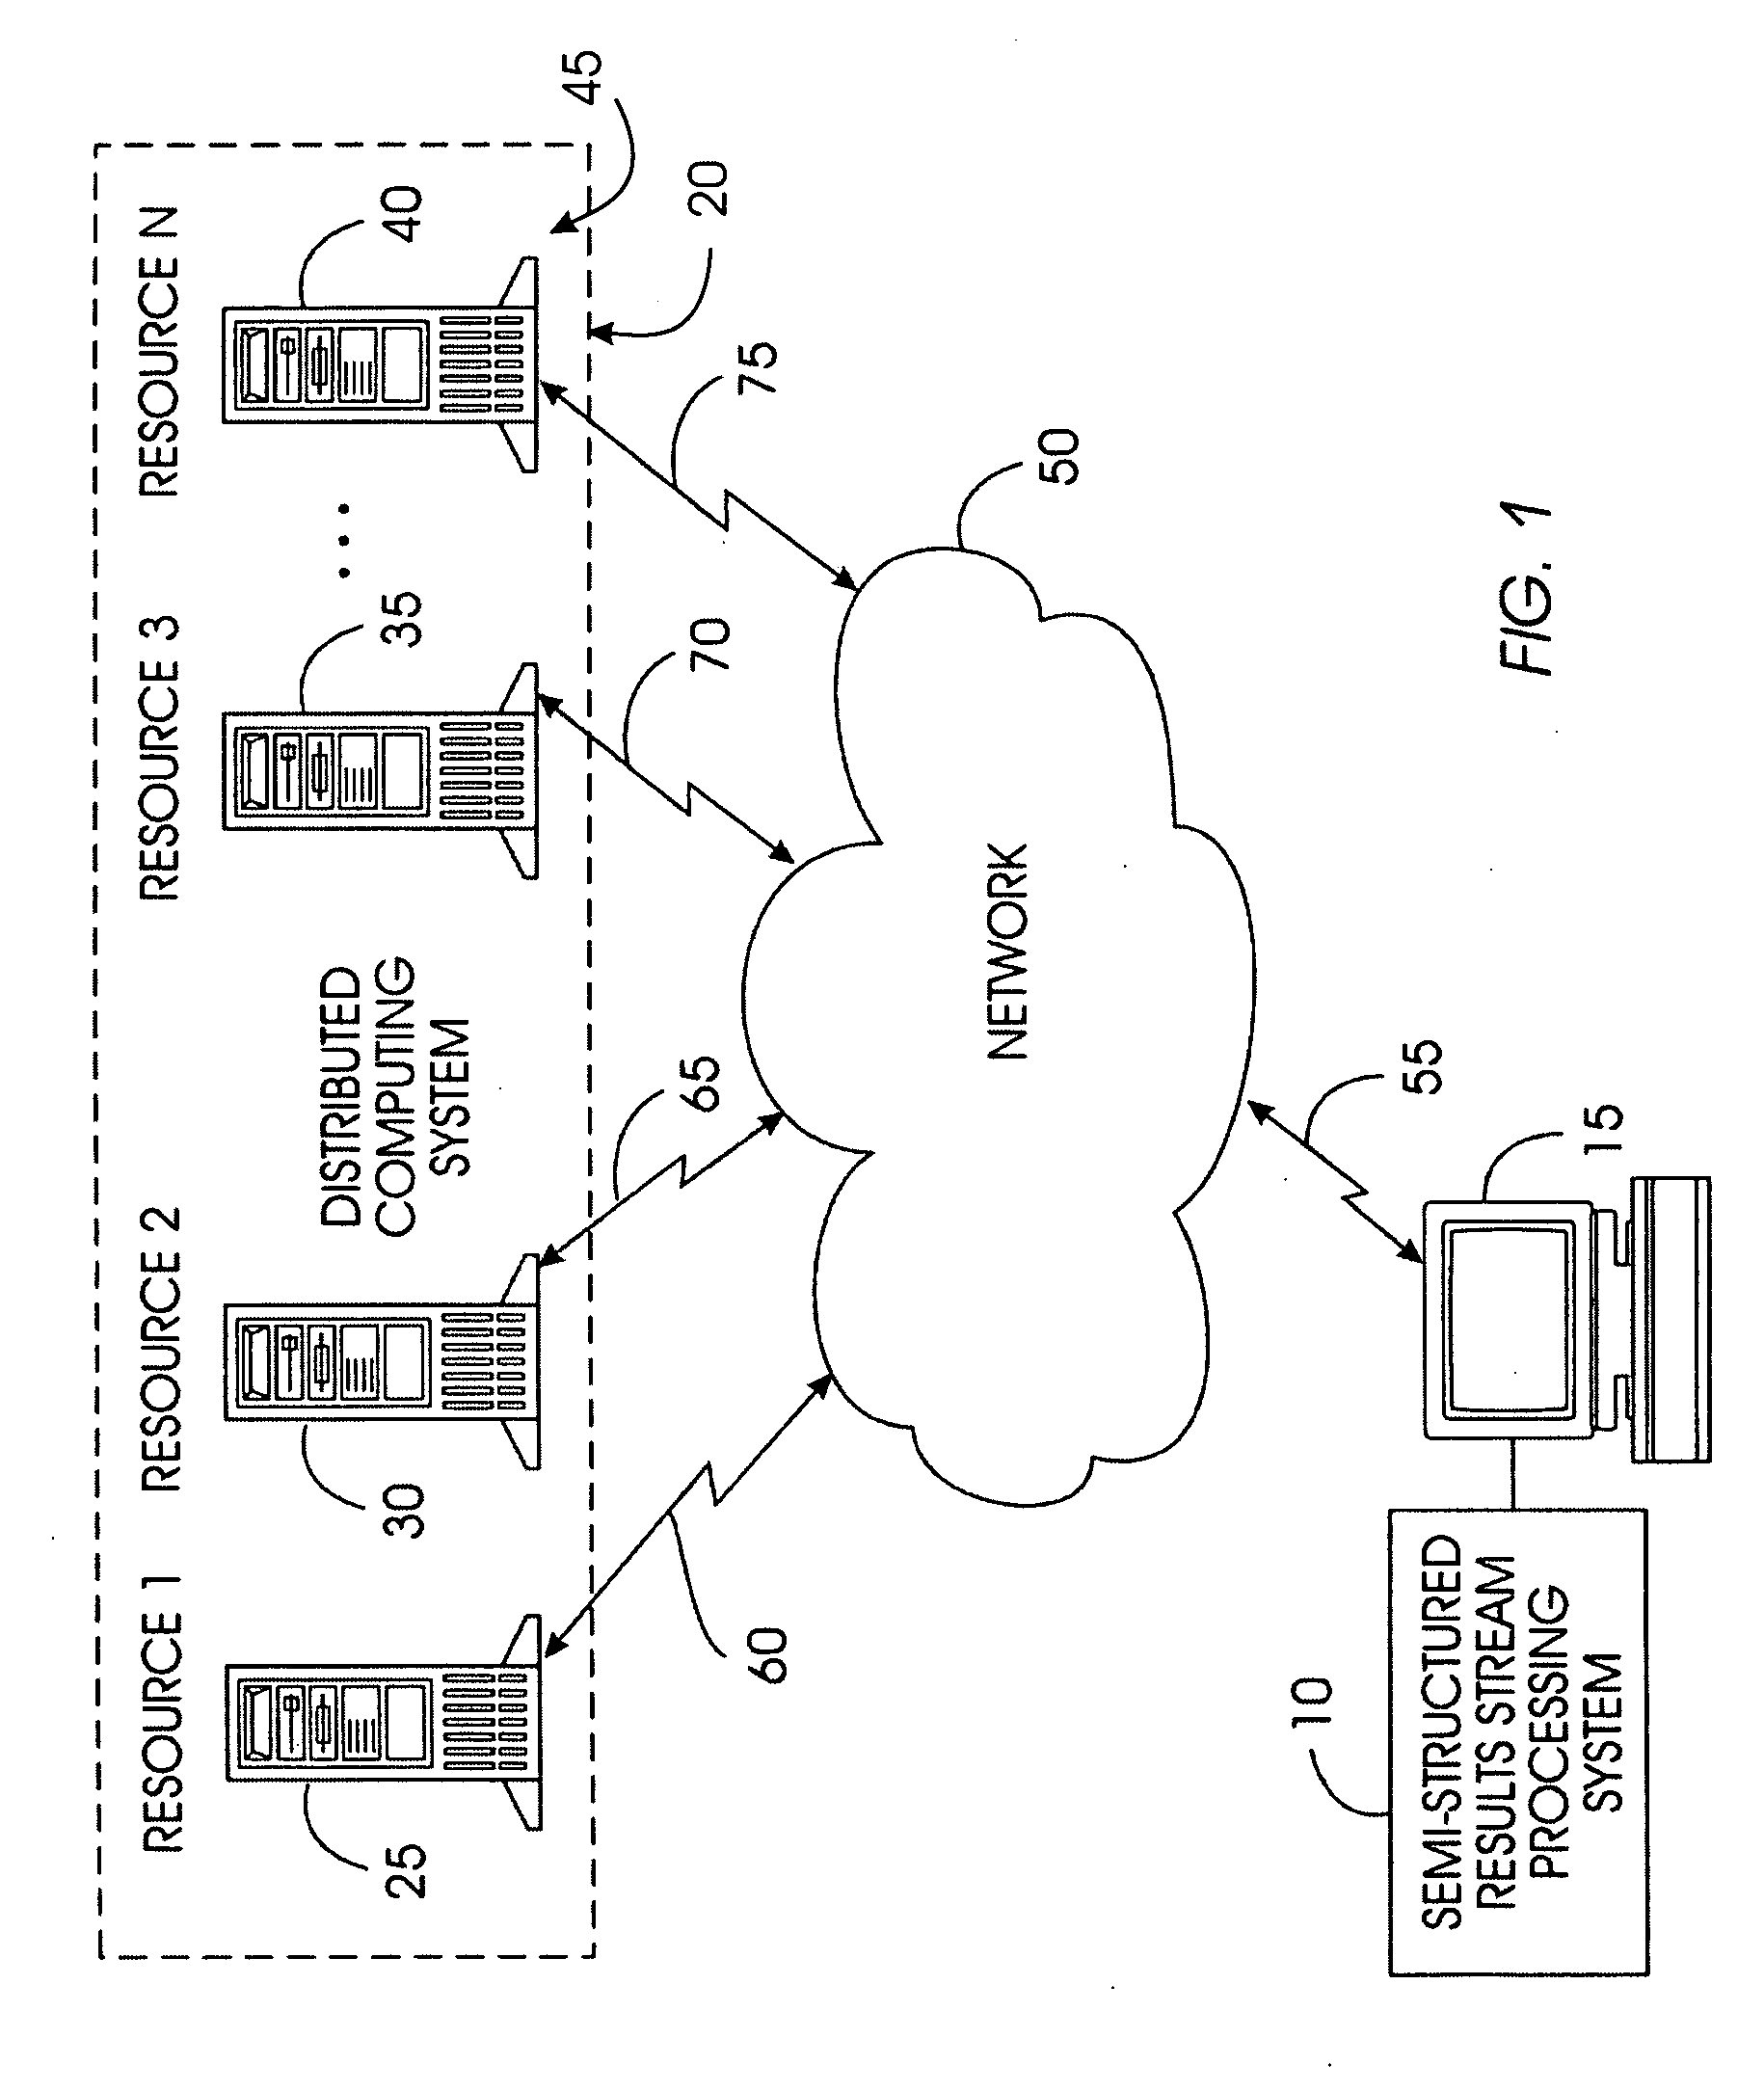 System and method for bulk processing of semi-structured result streams from multiple resources